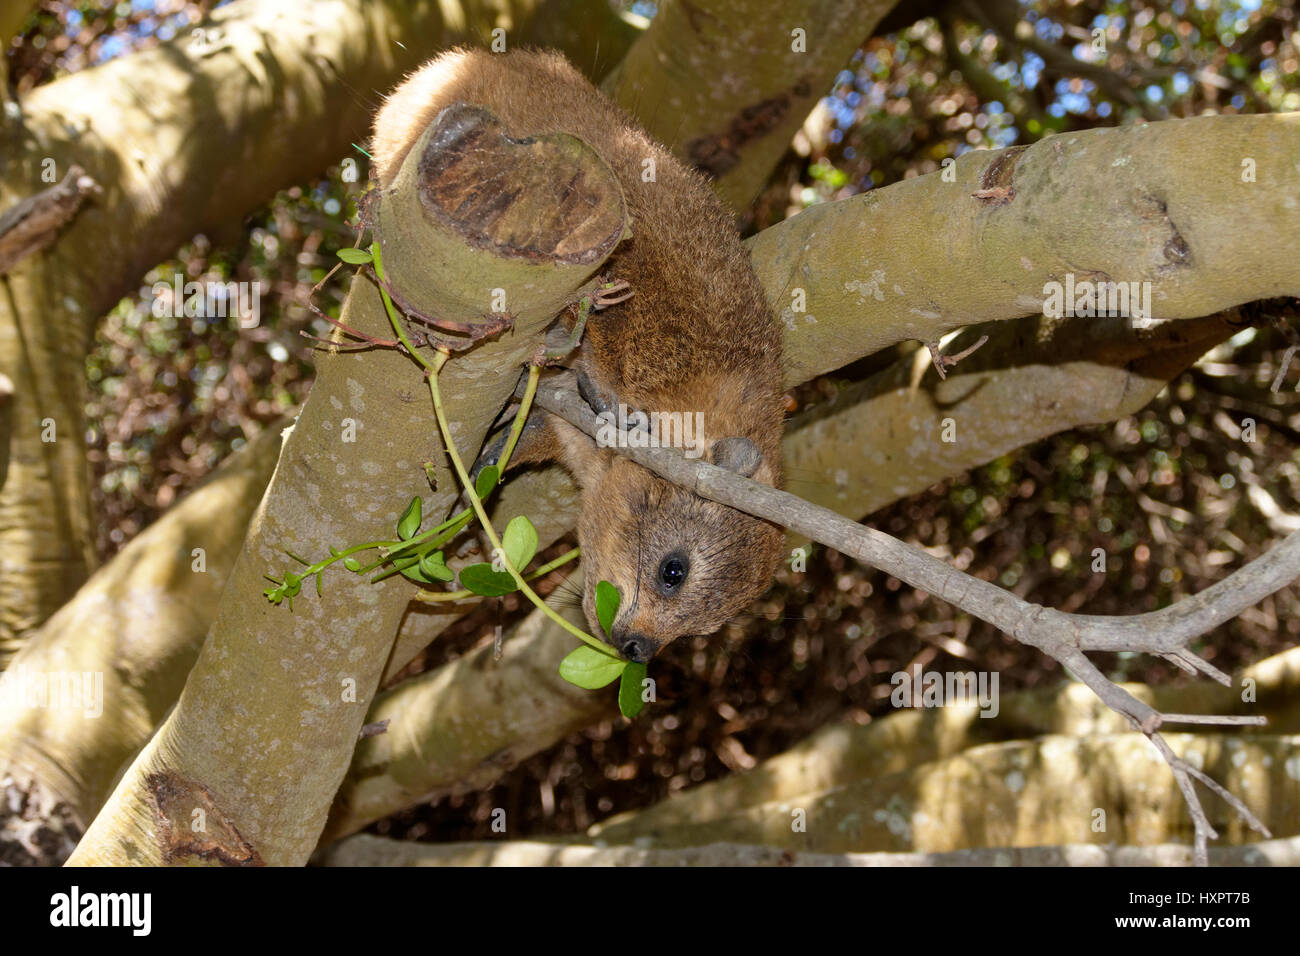 Cape Hyrax or Rock Hyrax, (Procavia capensis), Boulders Beach, Simon's Town, Western Cape Province, South Africa, Africa Stock Photo